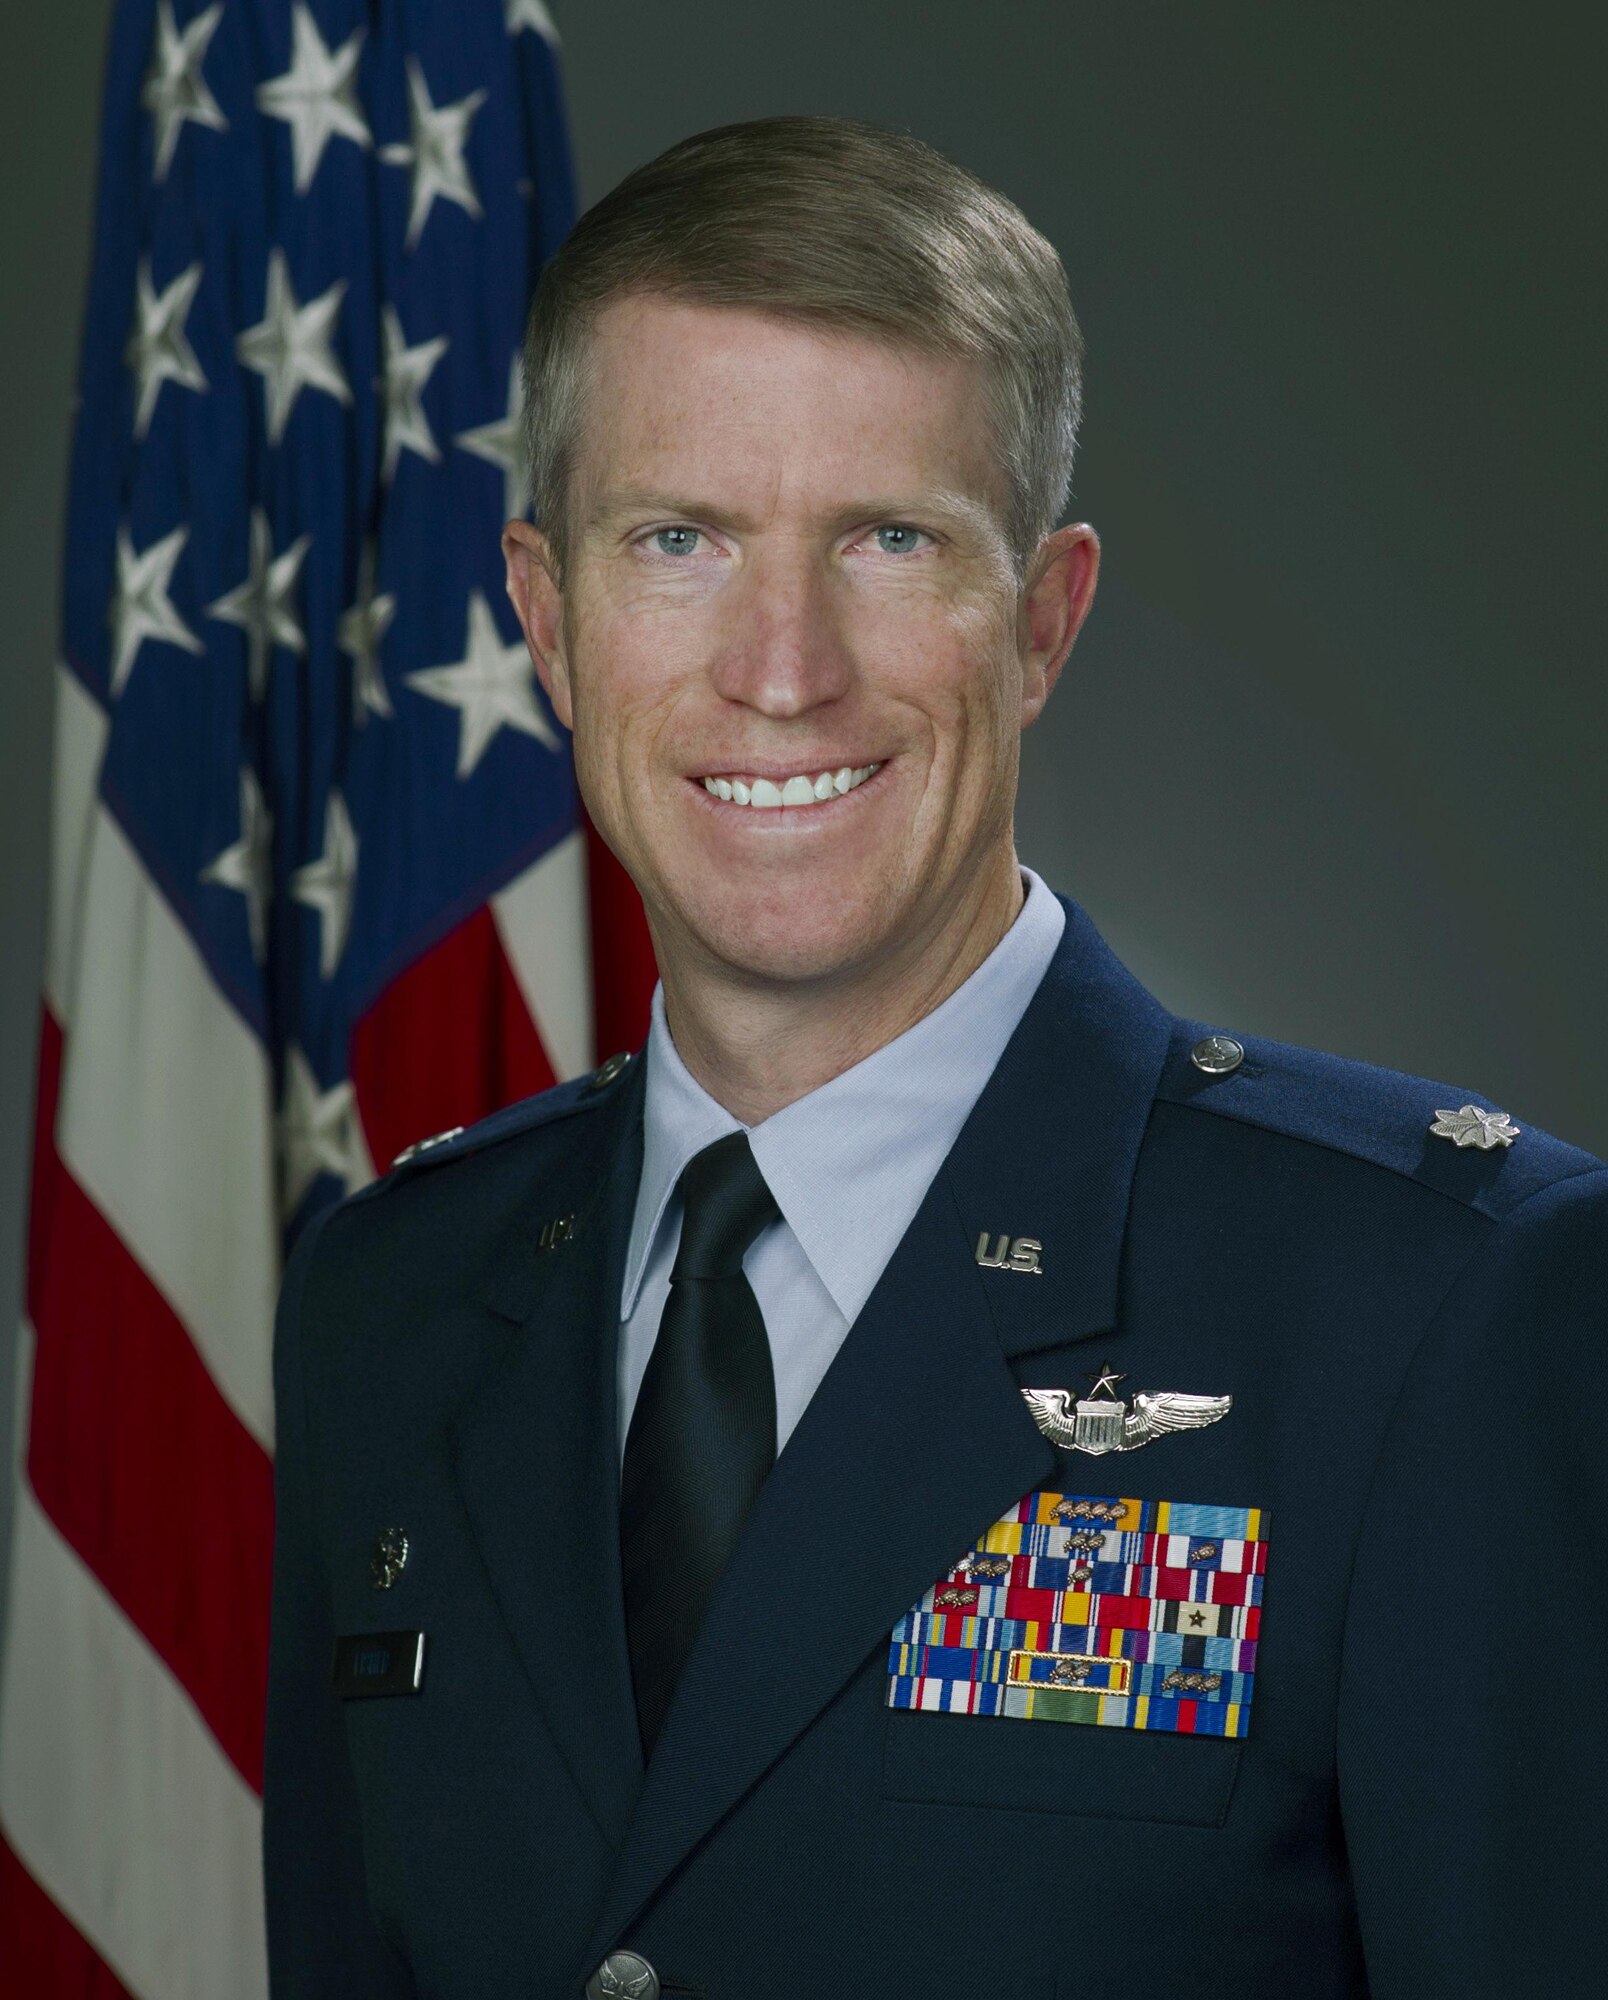 Lt. Col. Erik Fisher, 21st Airlift Squadron commander, shares some thoughts on why he chose to continue serving in the U.S. Air Force. (U.S. Air Force Courtesy Photo)